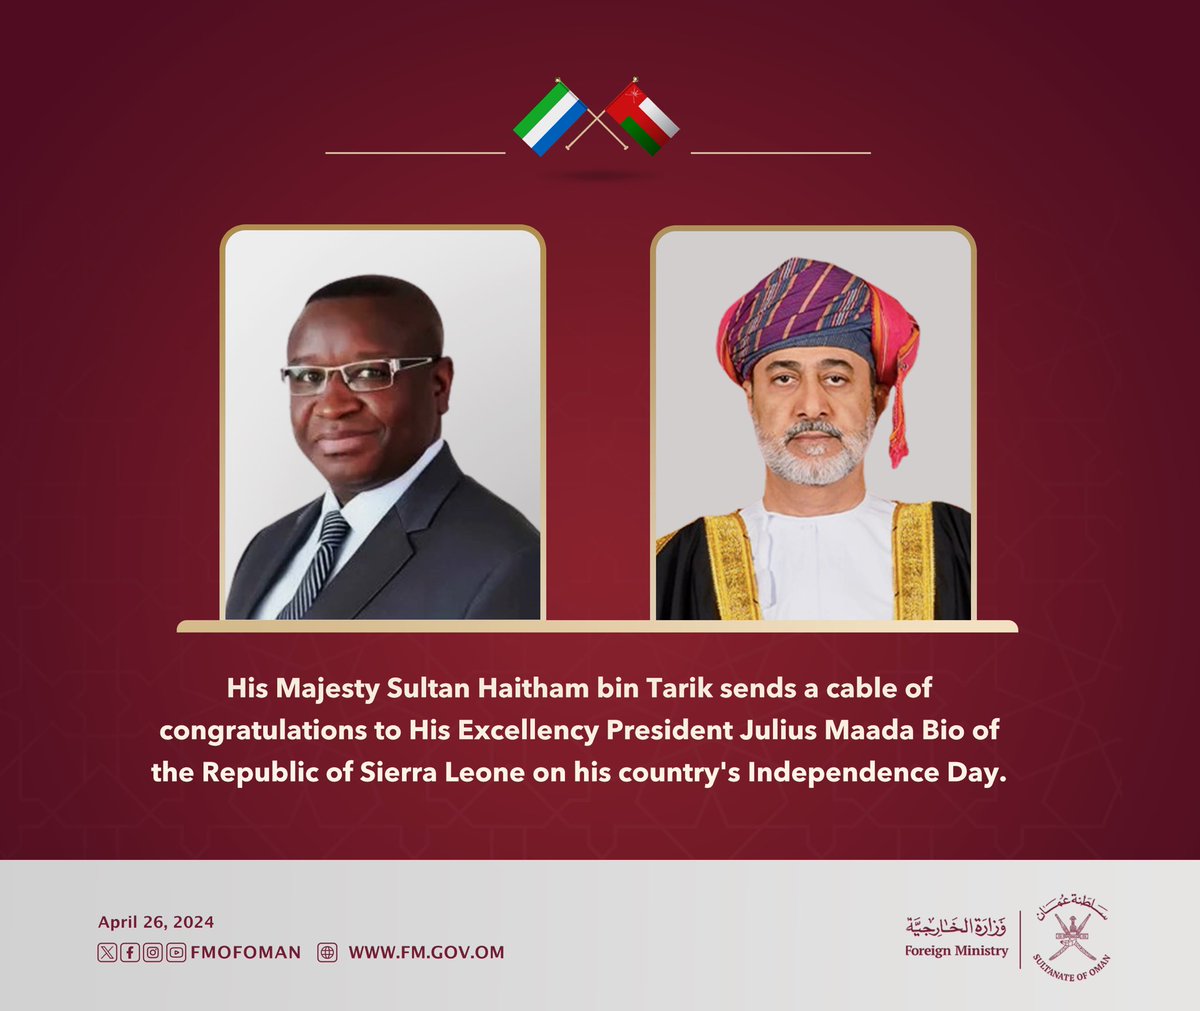 His Majesty the Sultan sends a cable of congratulations to His Excellency President Julius Maada Bio of the Republic of #SierraLeone on his country's Independence Day.